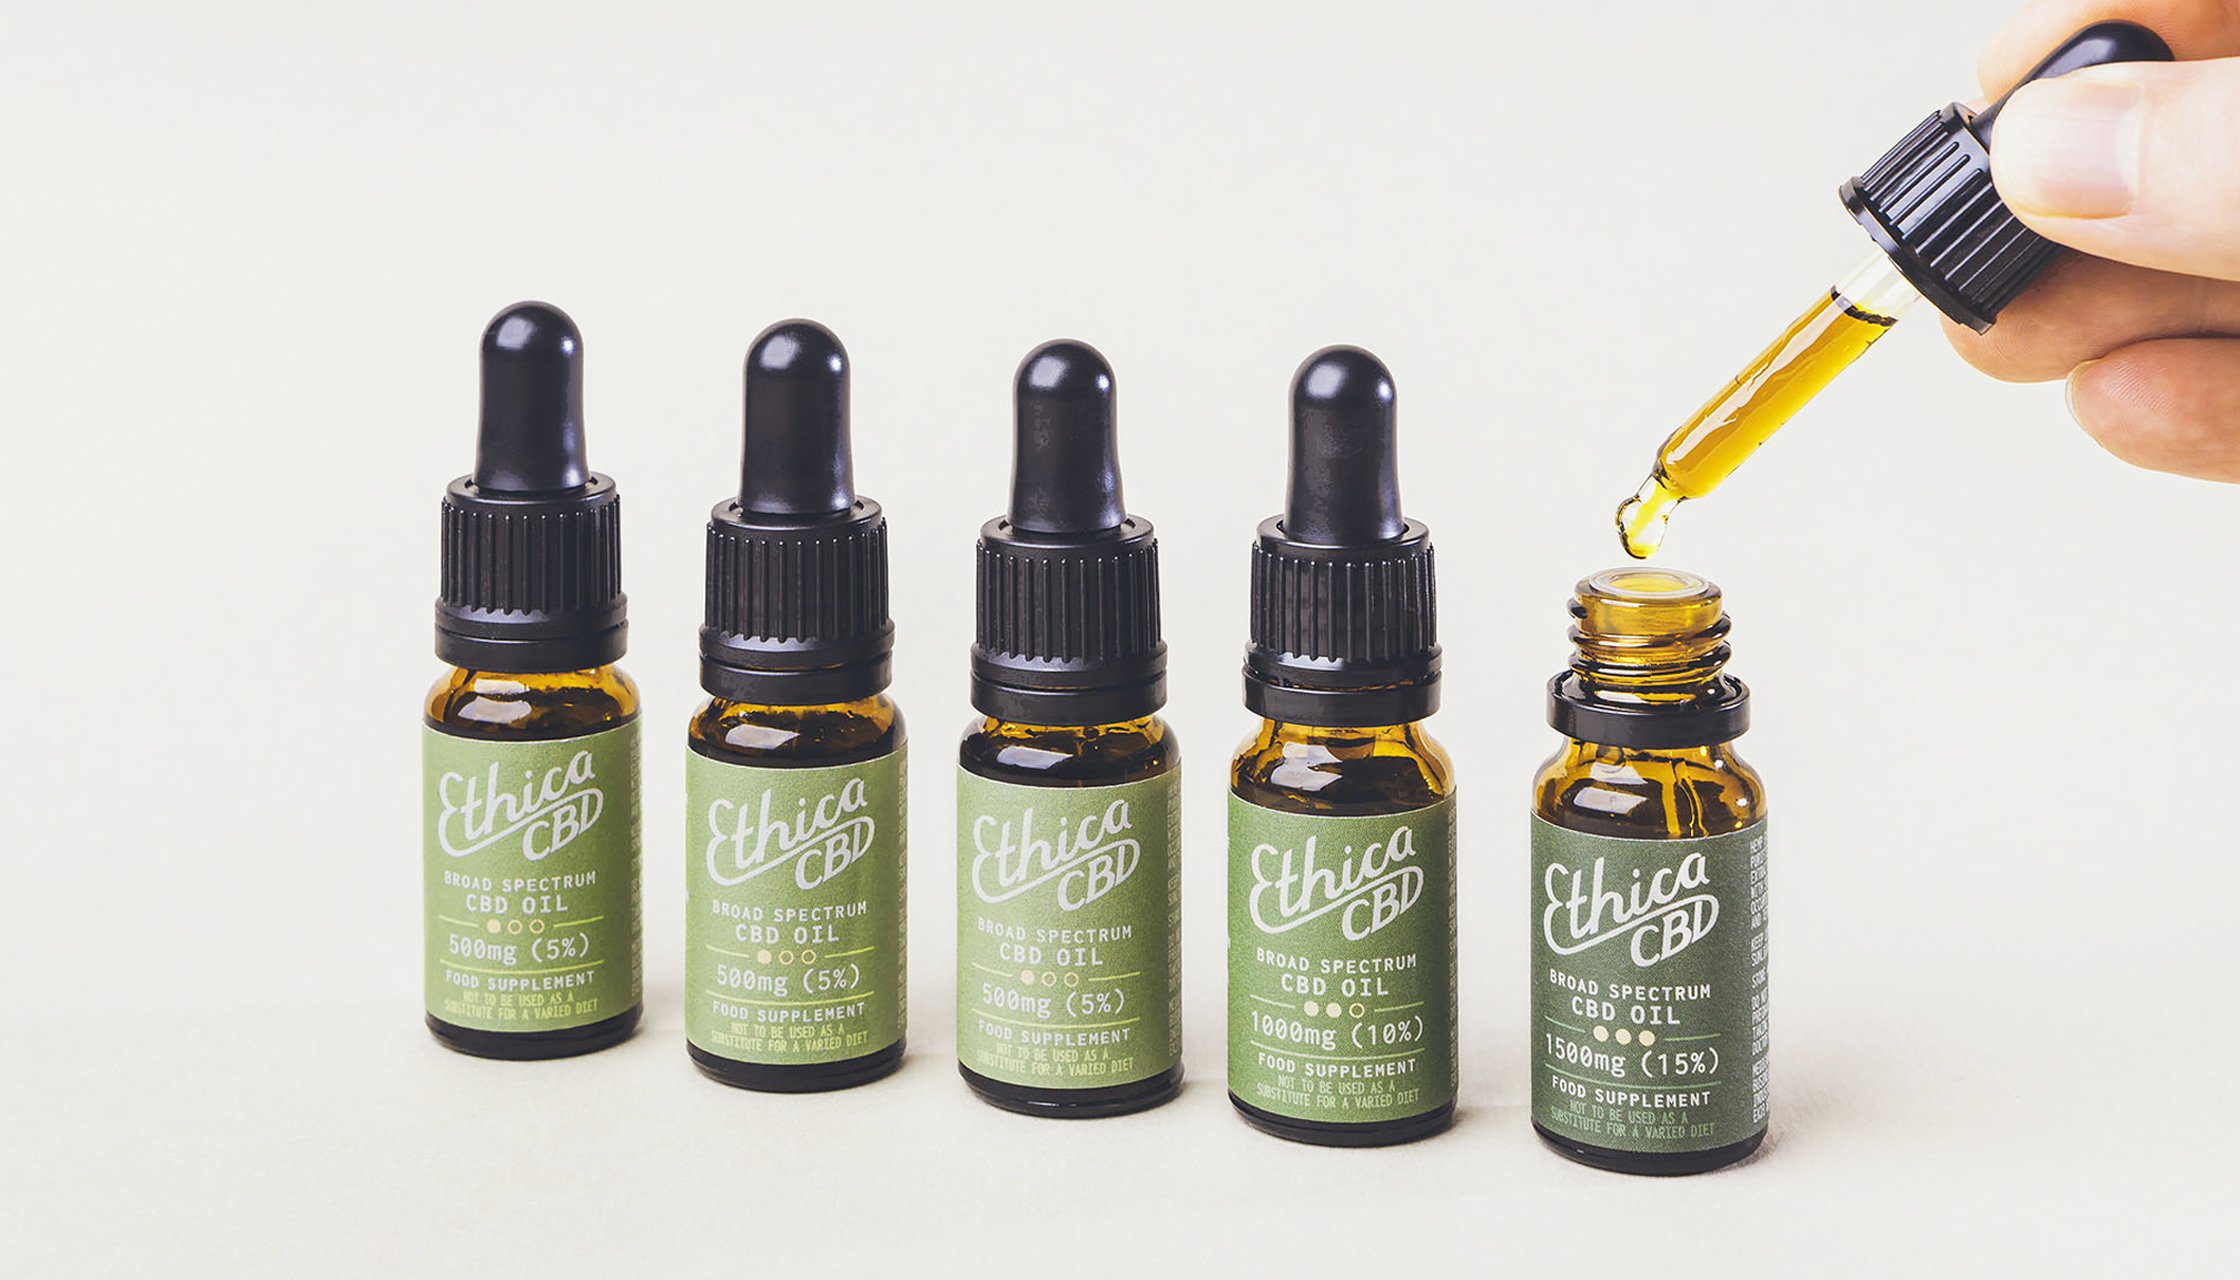 EthicaCBD Wholeplant tincture bottle design by Kingdom and Sparrow